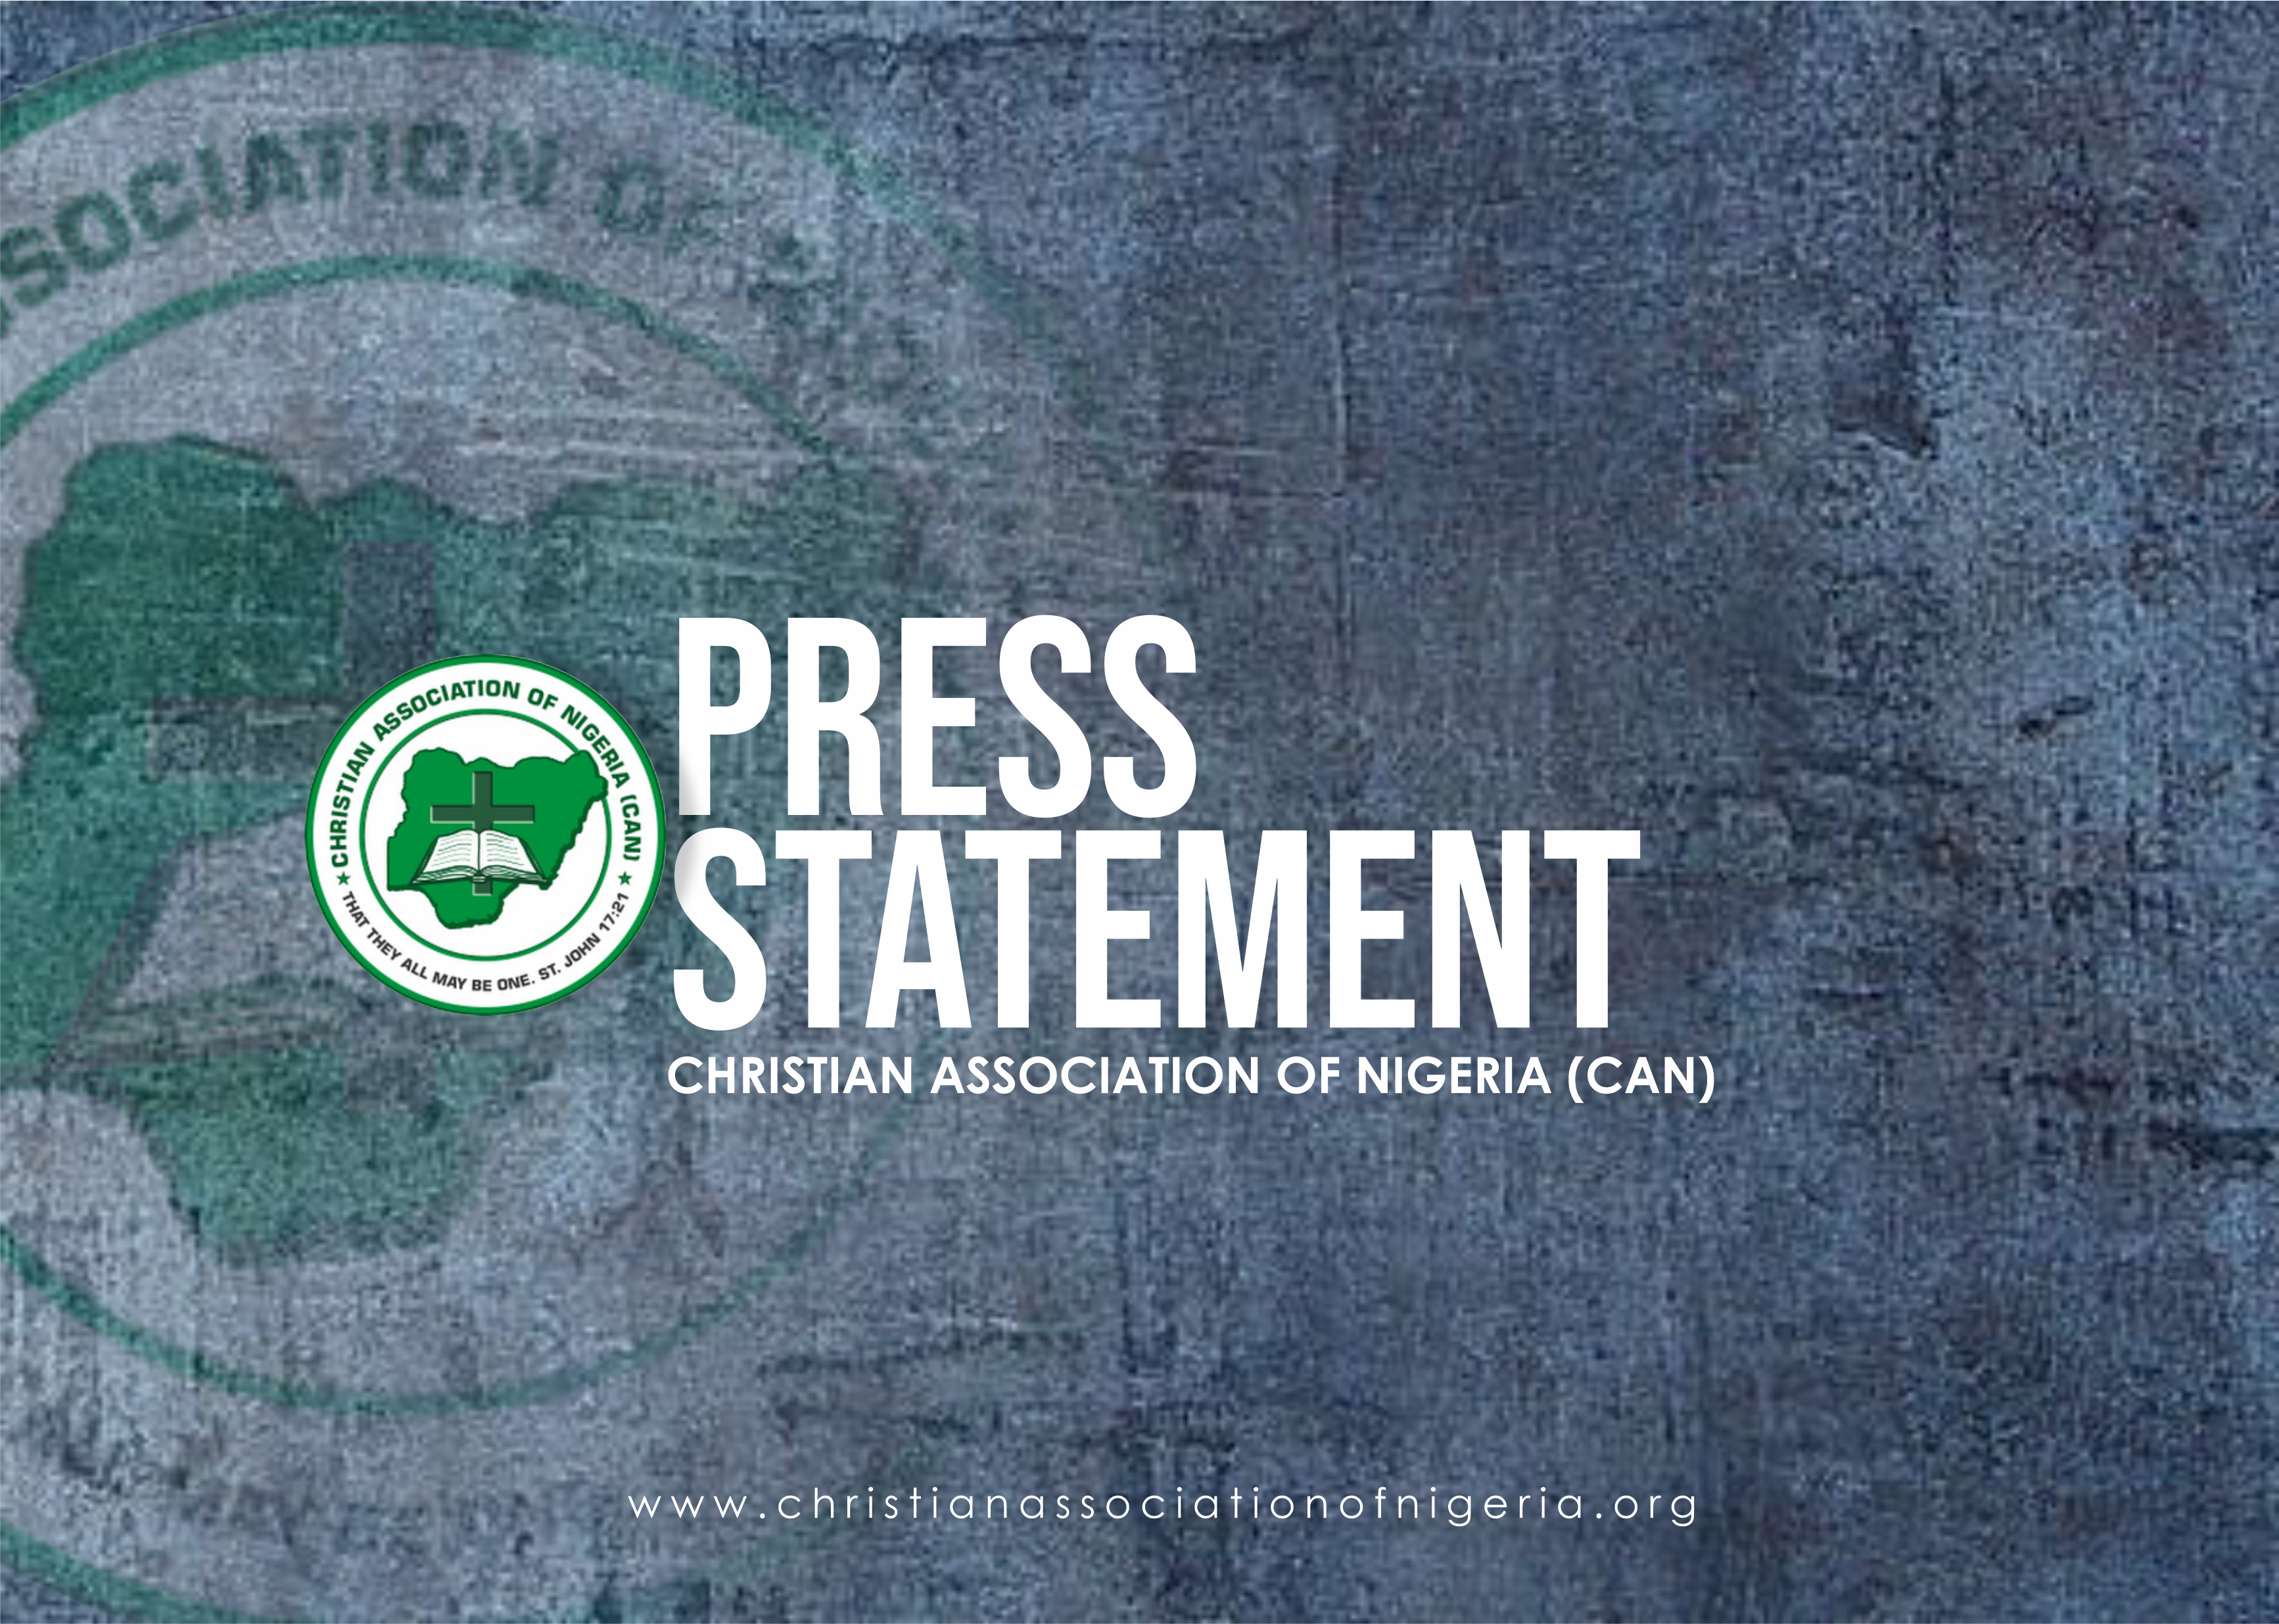 Press Release: An Act To Establish The National Council For Christian Education